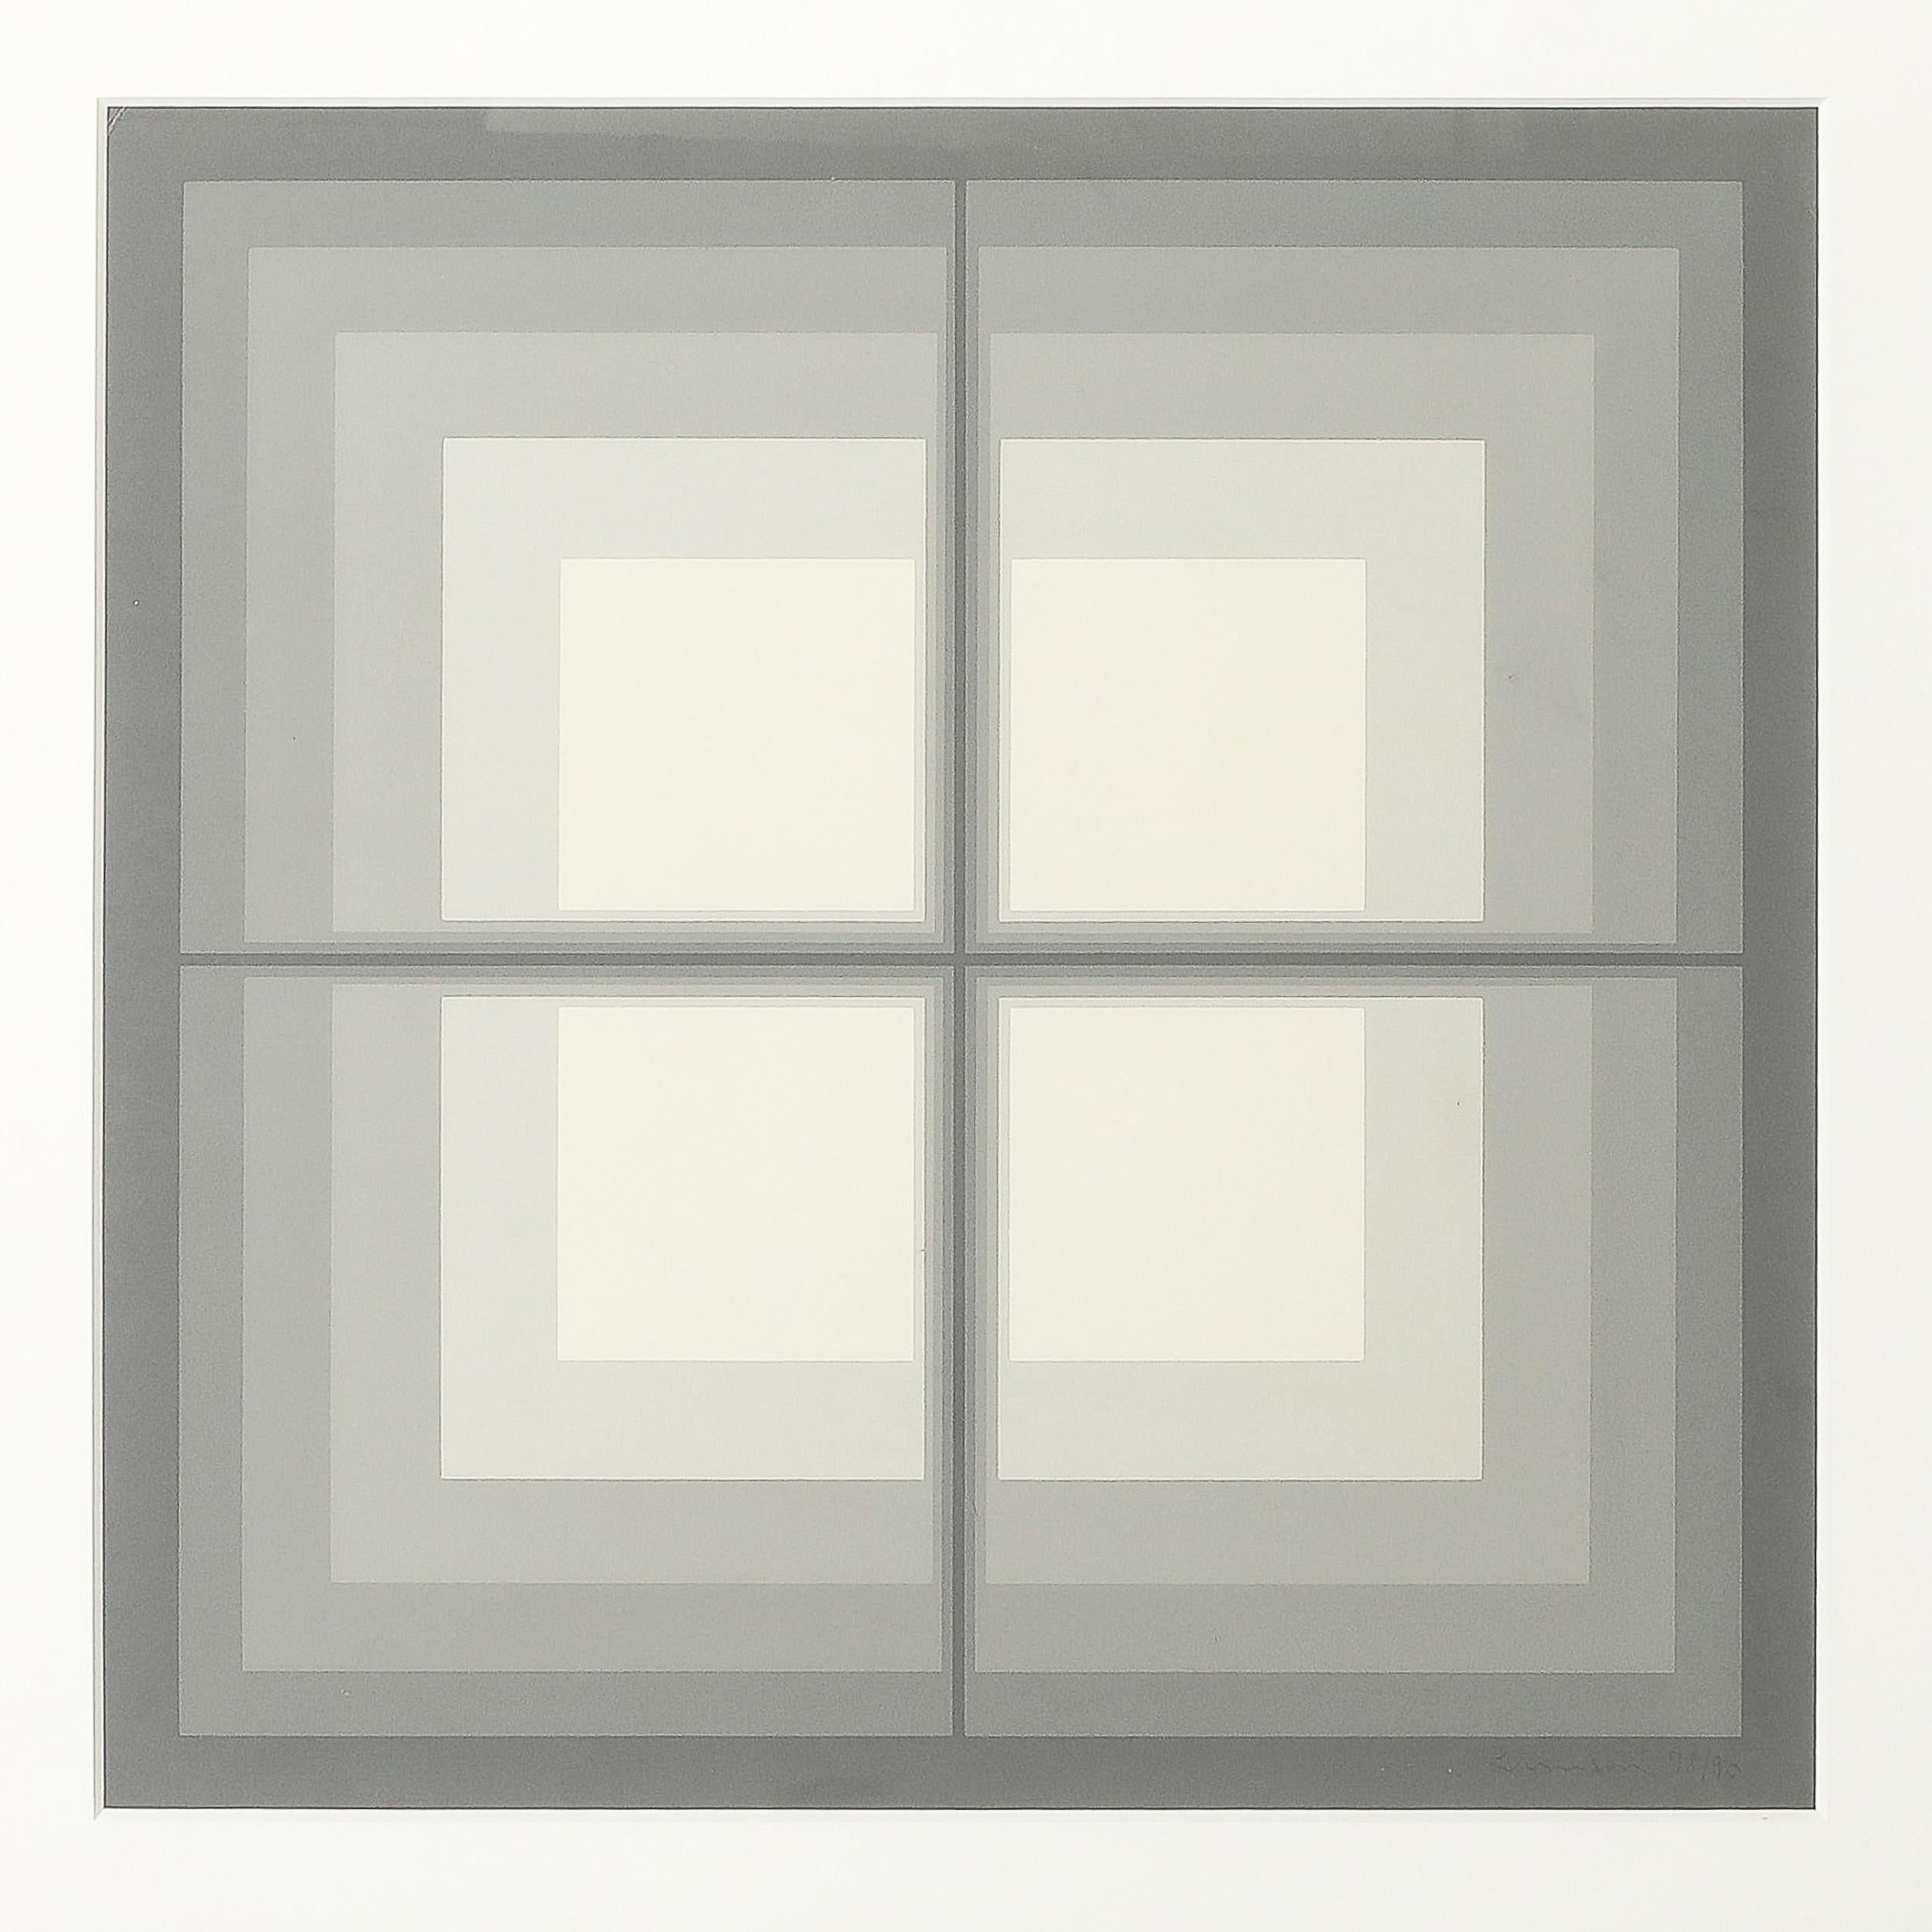 Mon Levinson Modernist Abstract Geometric Screen Print in Grey Squares For Sale 1